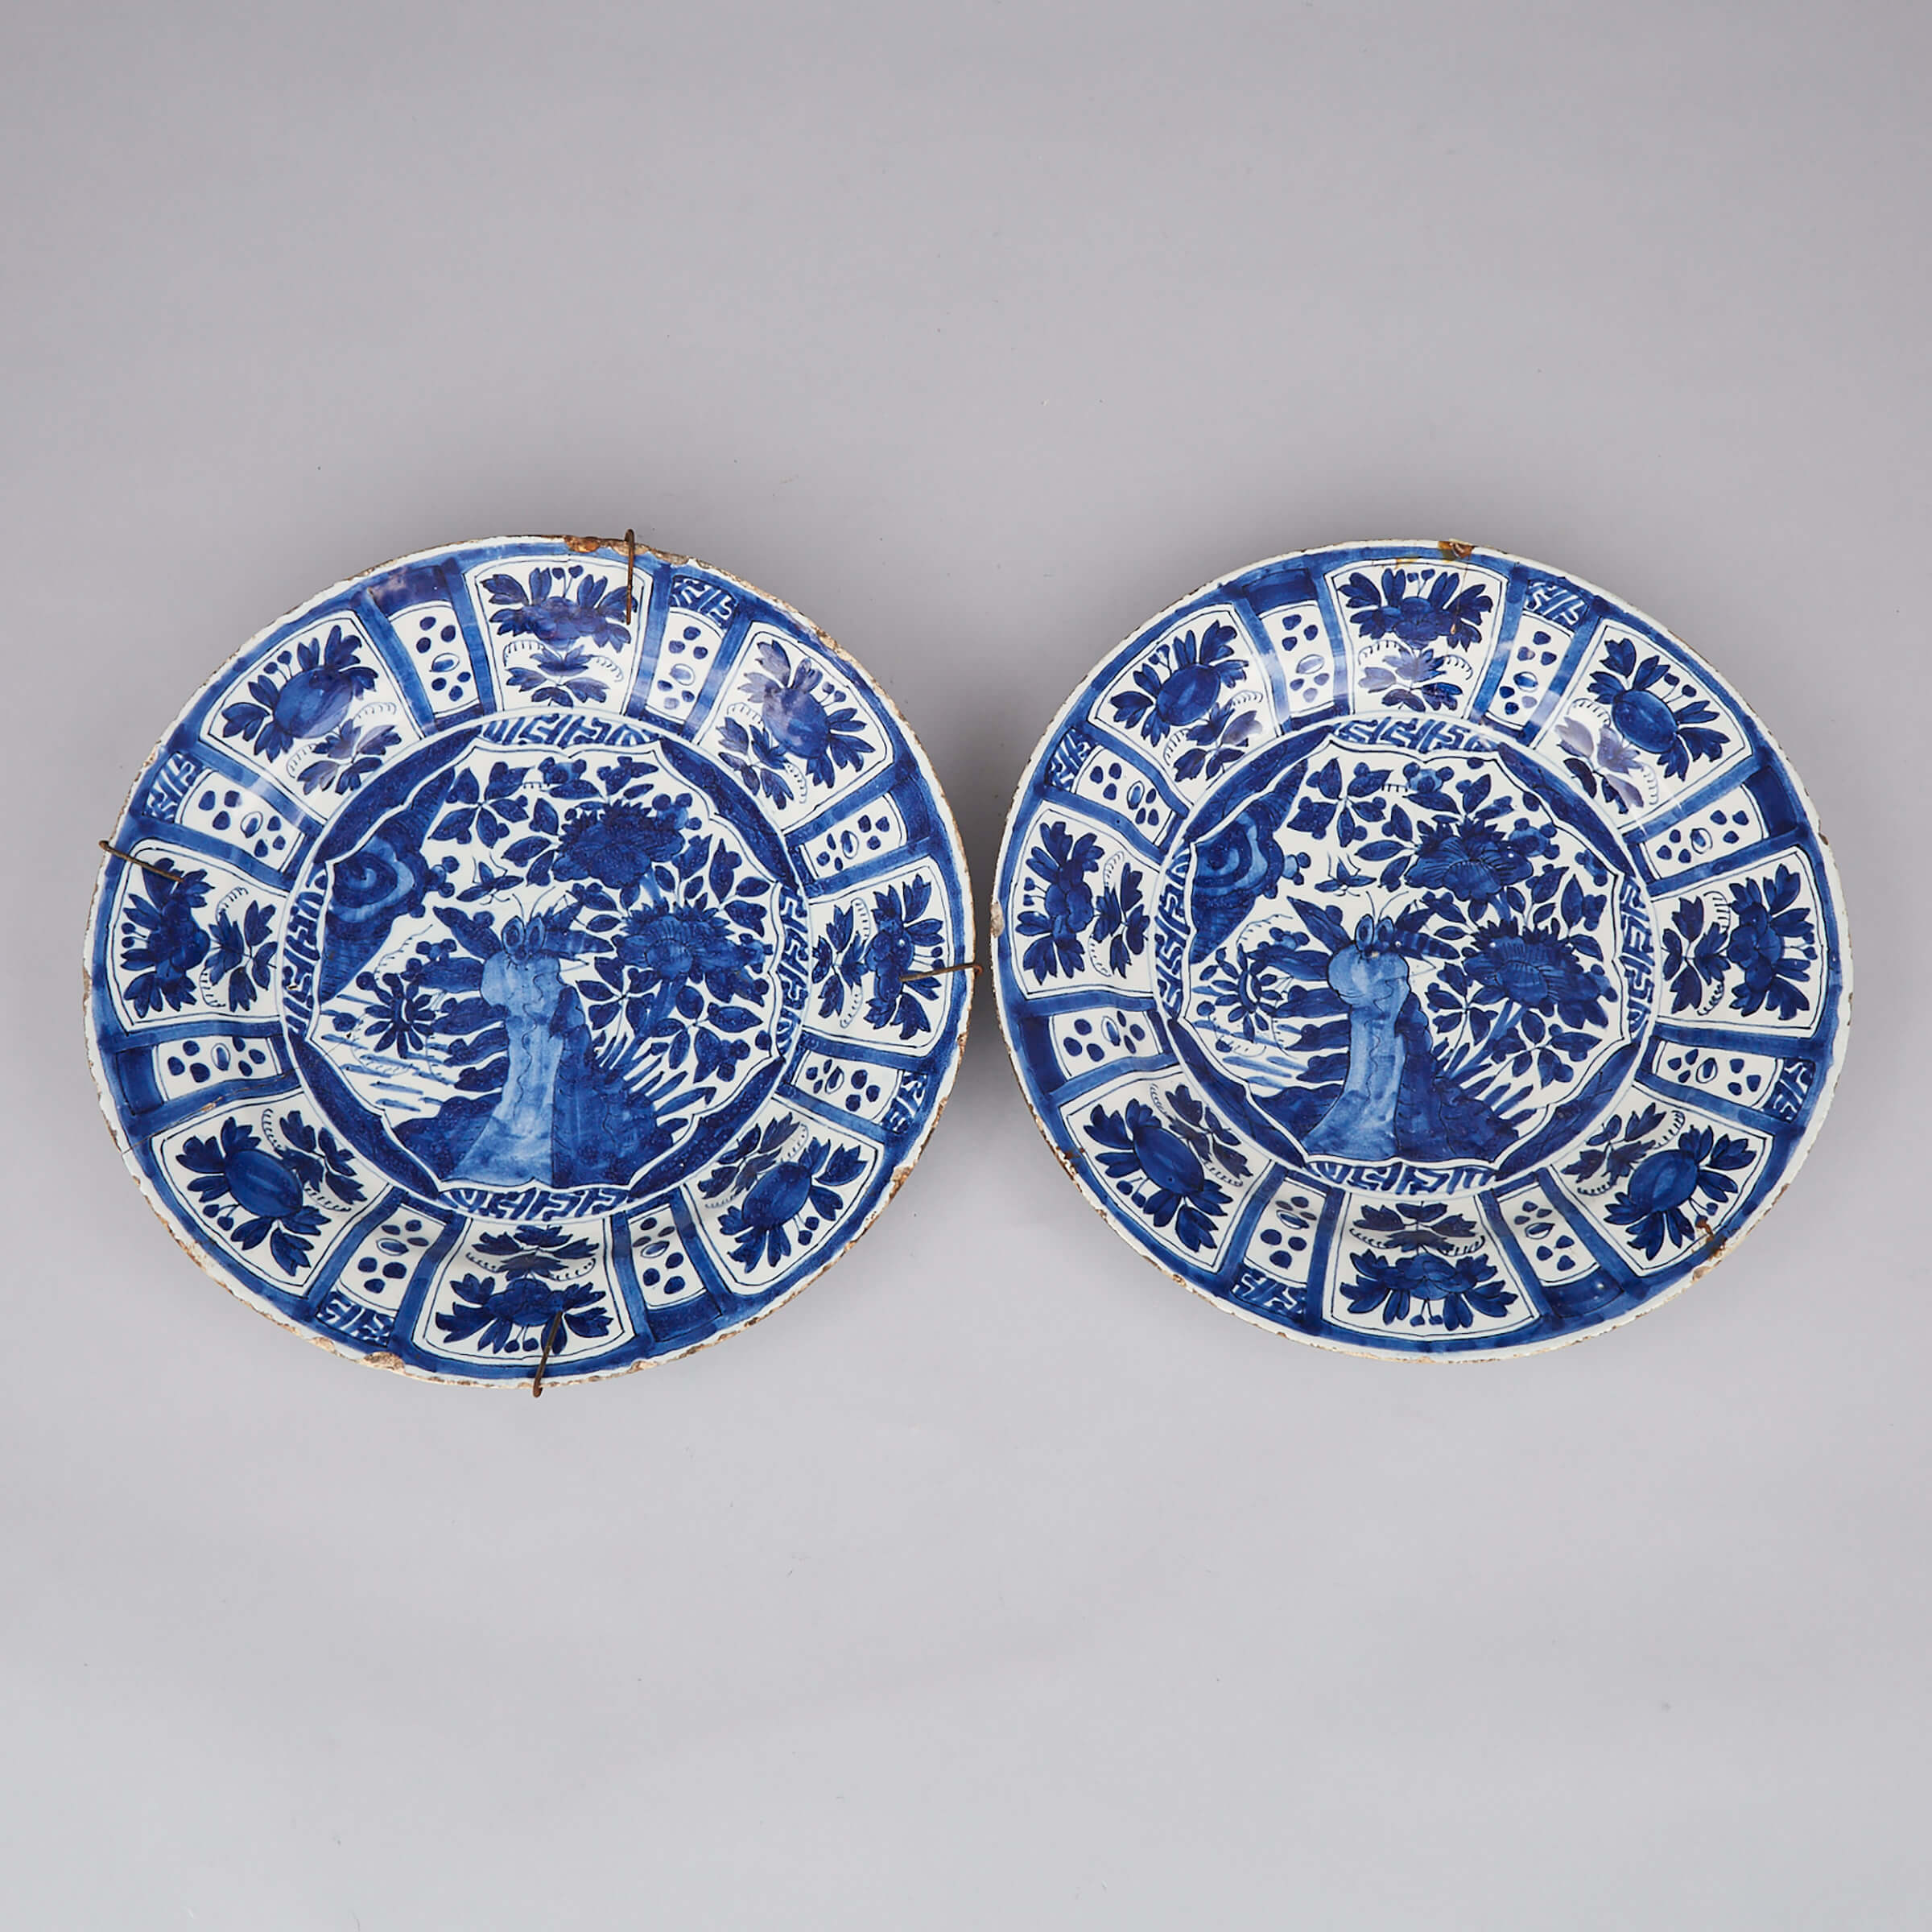 Pair of Dutch Delft Blue Painted Chargers, 18th century